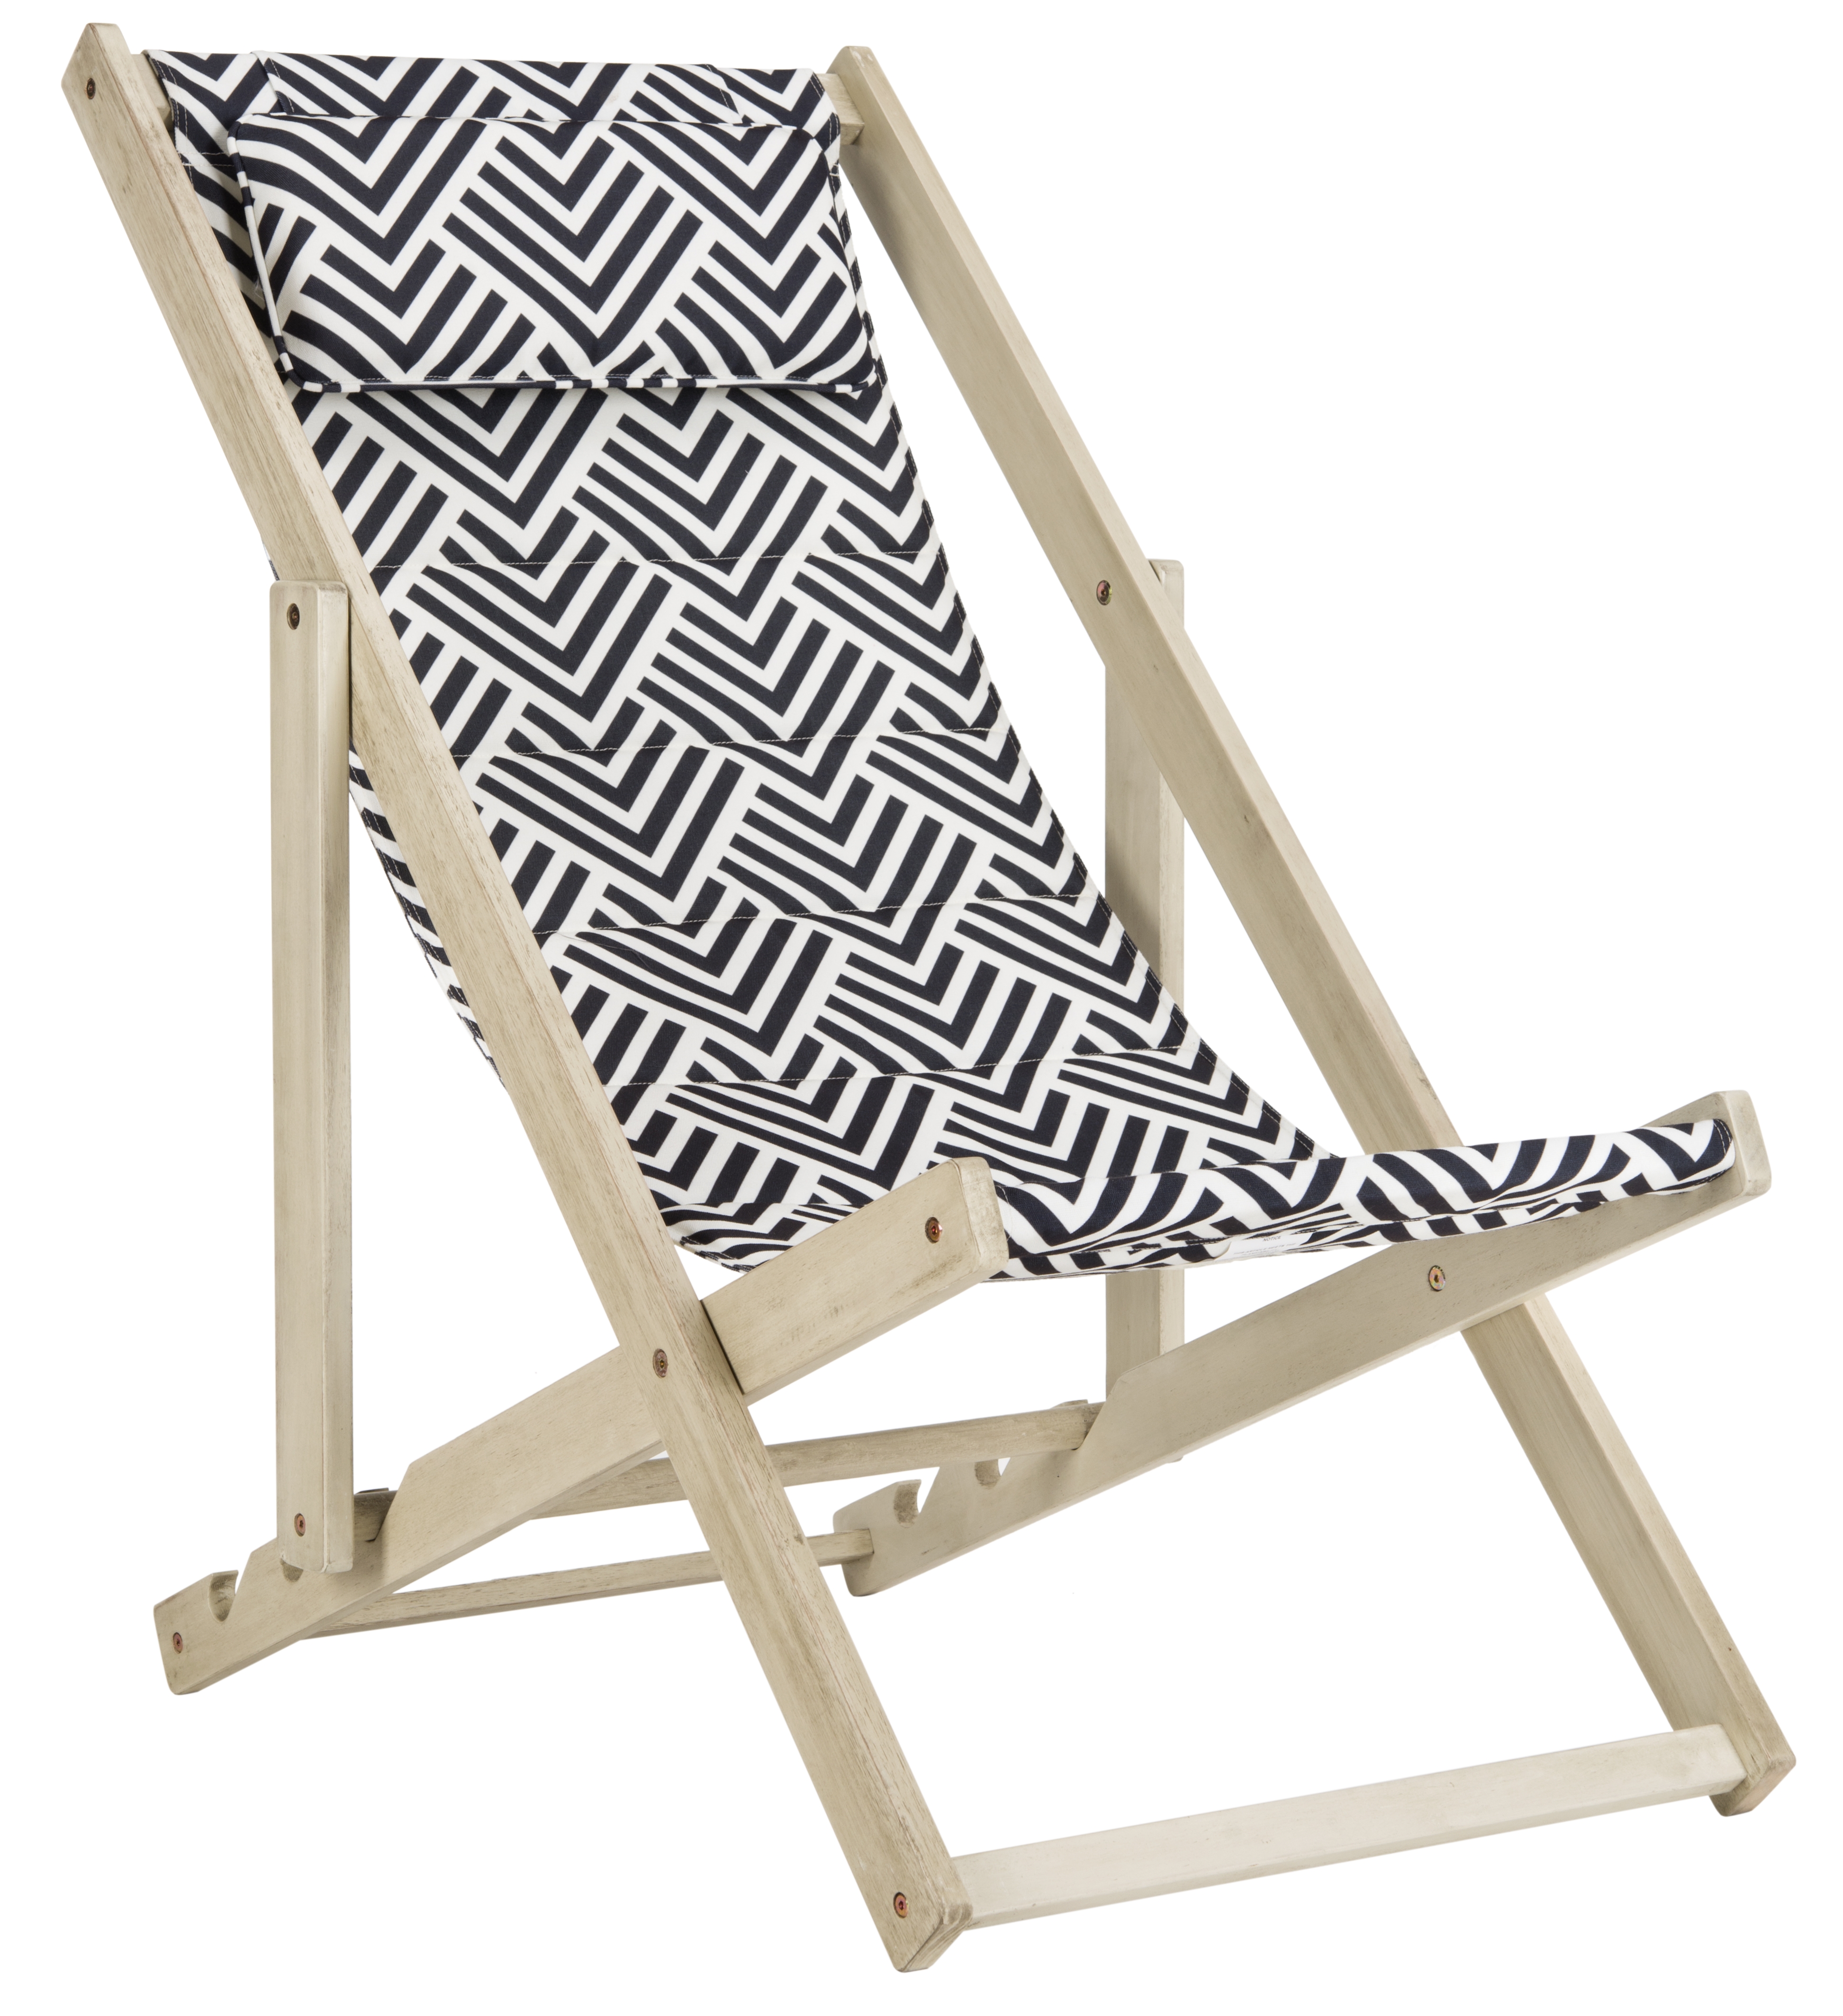 Rive Foldable Sling Chair - White Wash/Navy - Arlo Home - Image 1